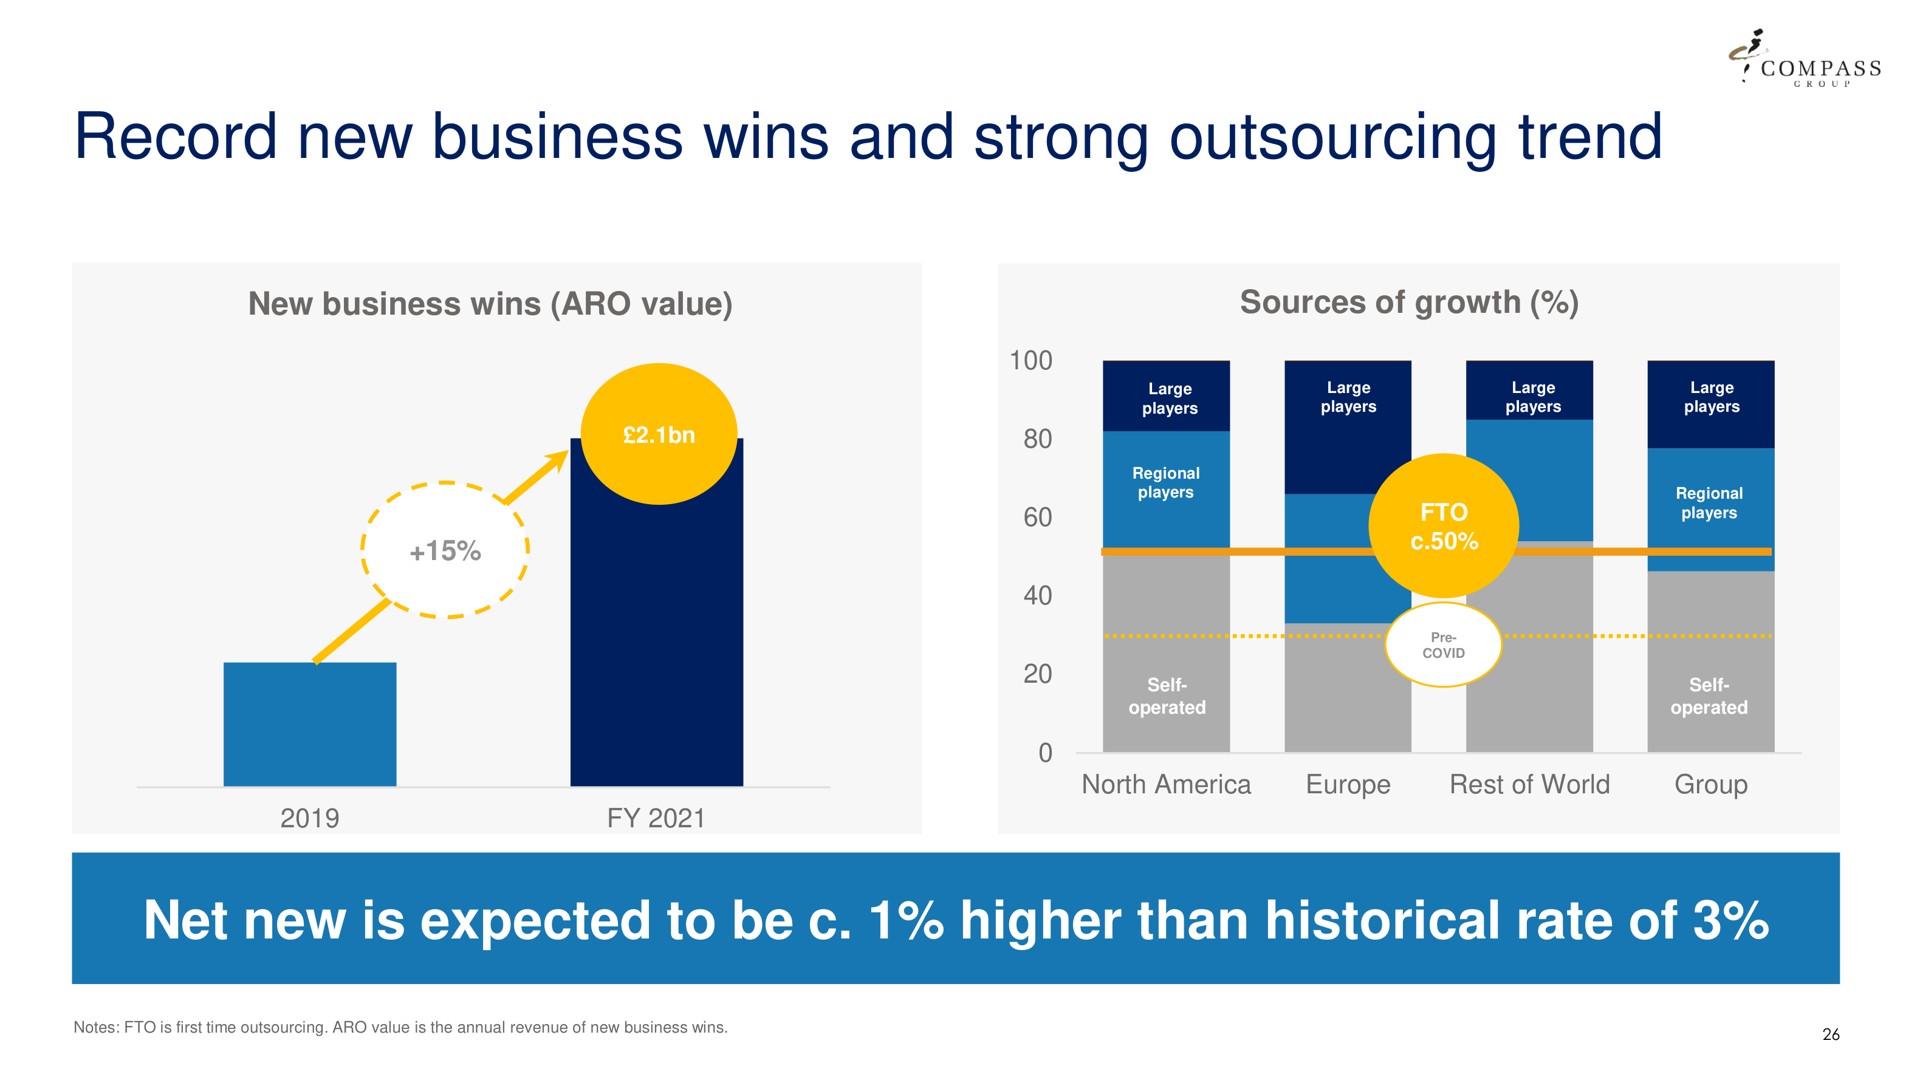 record new business wins and strong trend net is expected to be | Compass Group